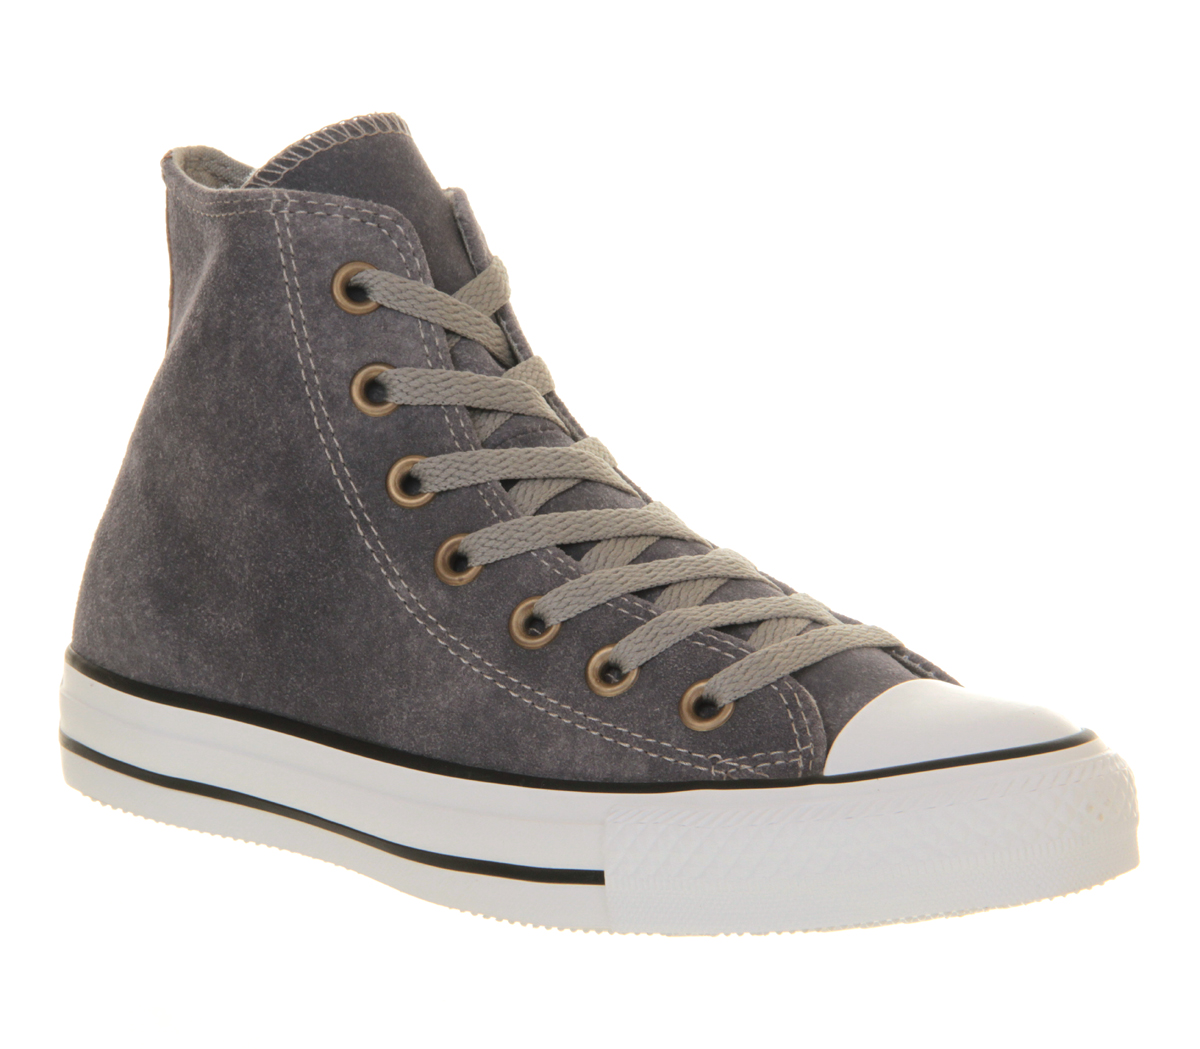 ConverseAll Star HiWaxed Drizzle Grey